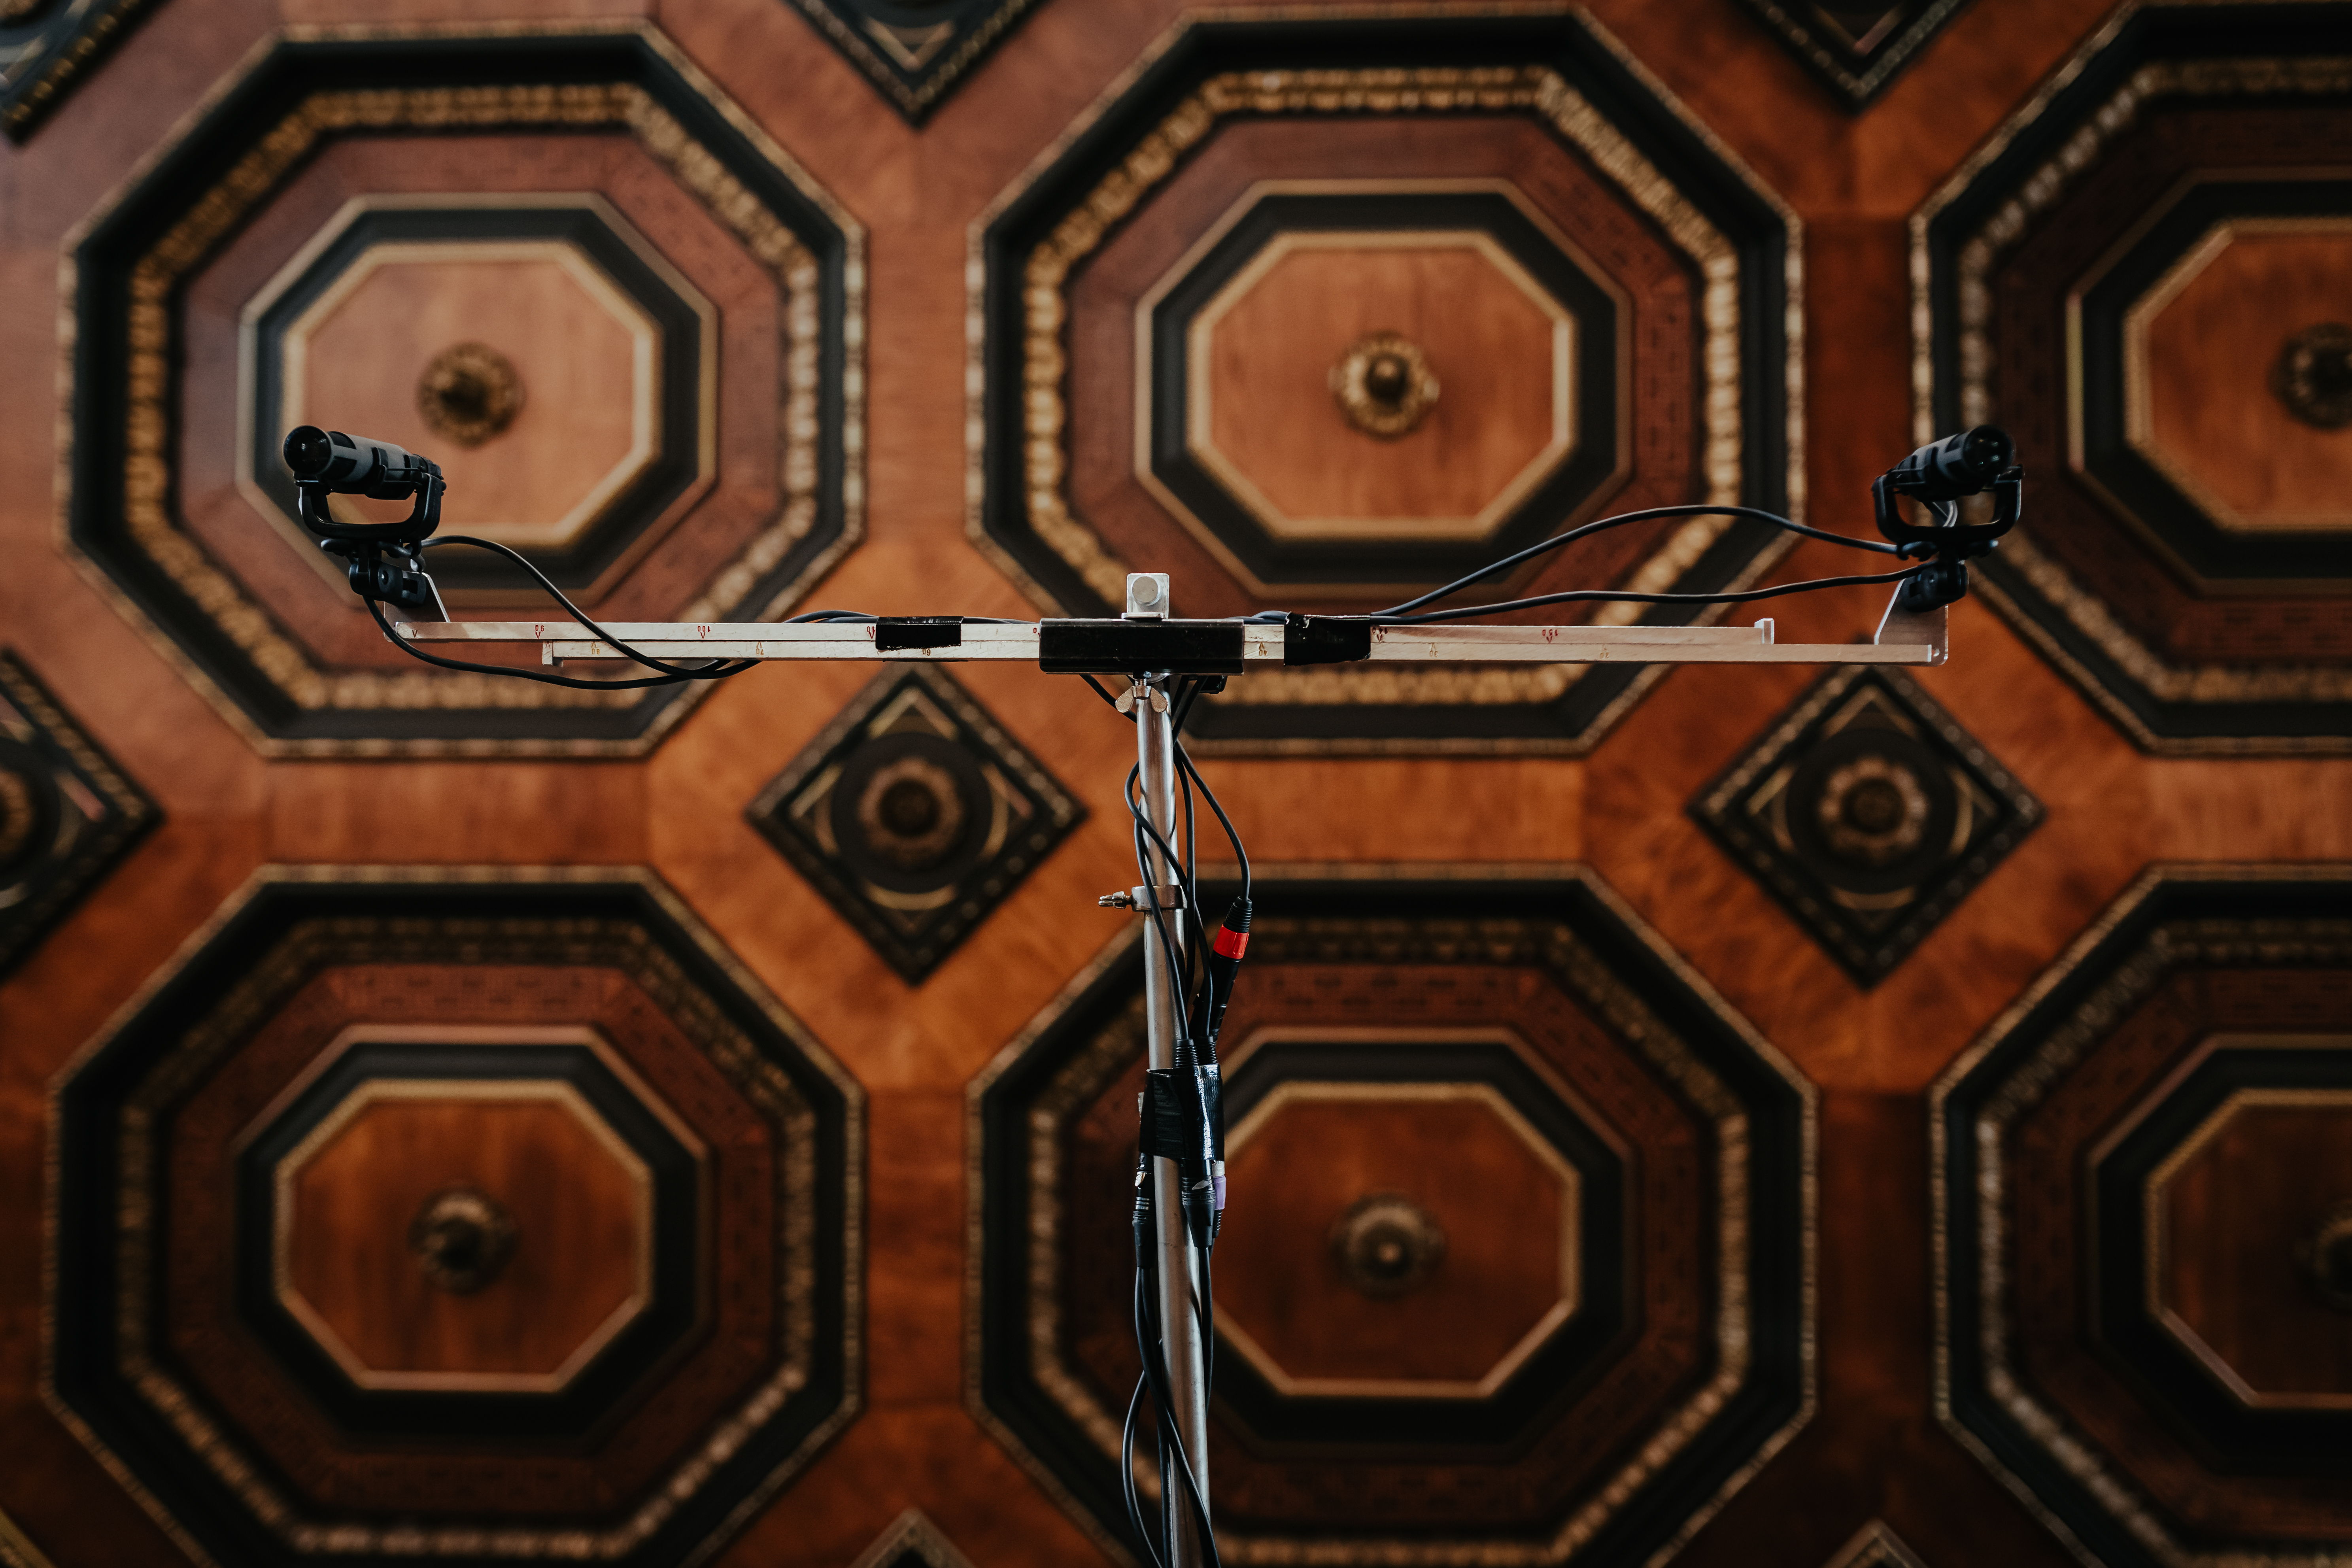 The two MKH 800 TWIN main microphones under the coffered ceiling of the Berlin Meistersaal ​ ​ Image: bildgeber.de, courtesy of the Mahler Chamber Orchestra